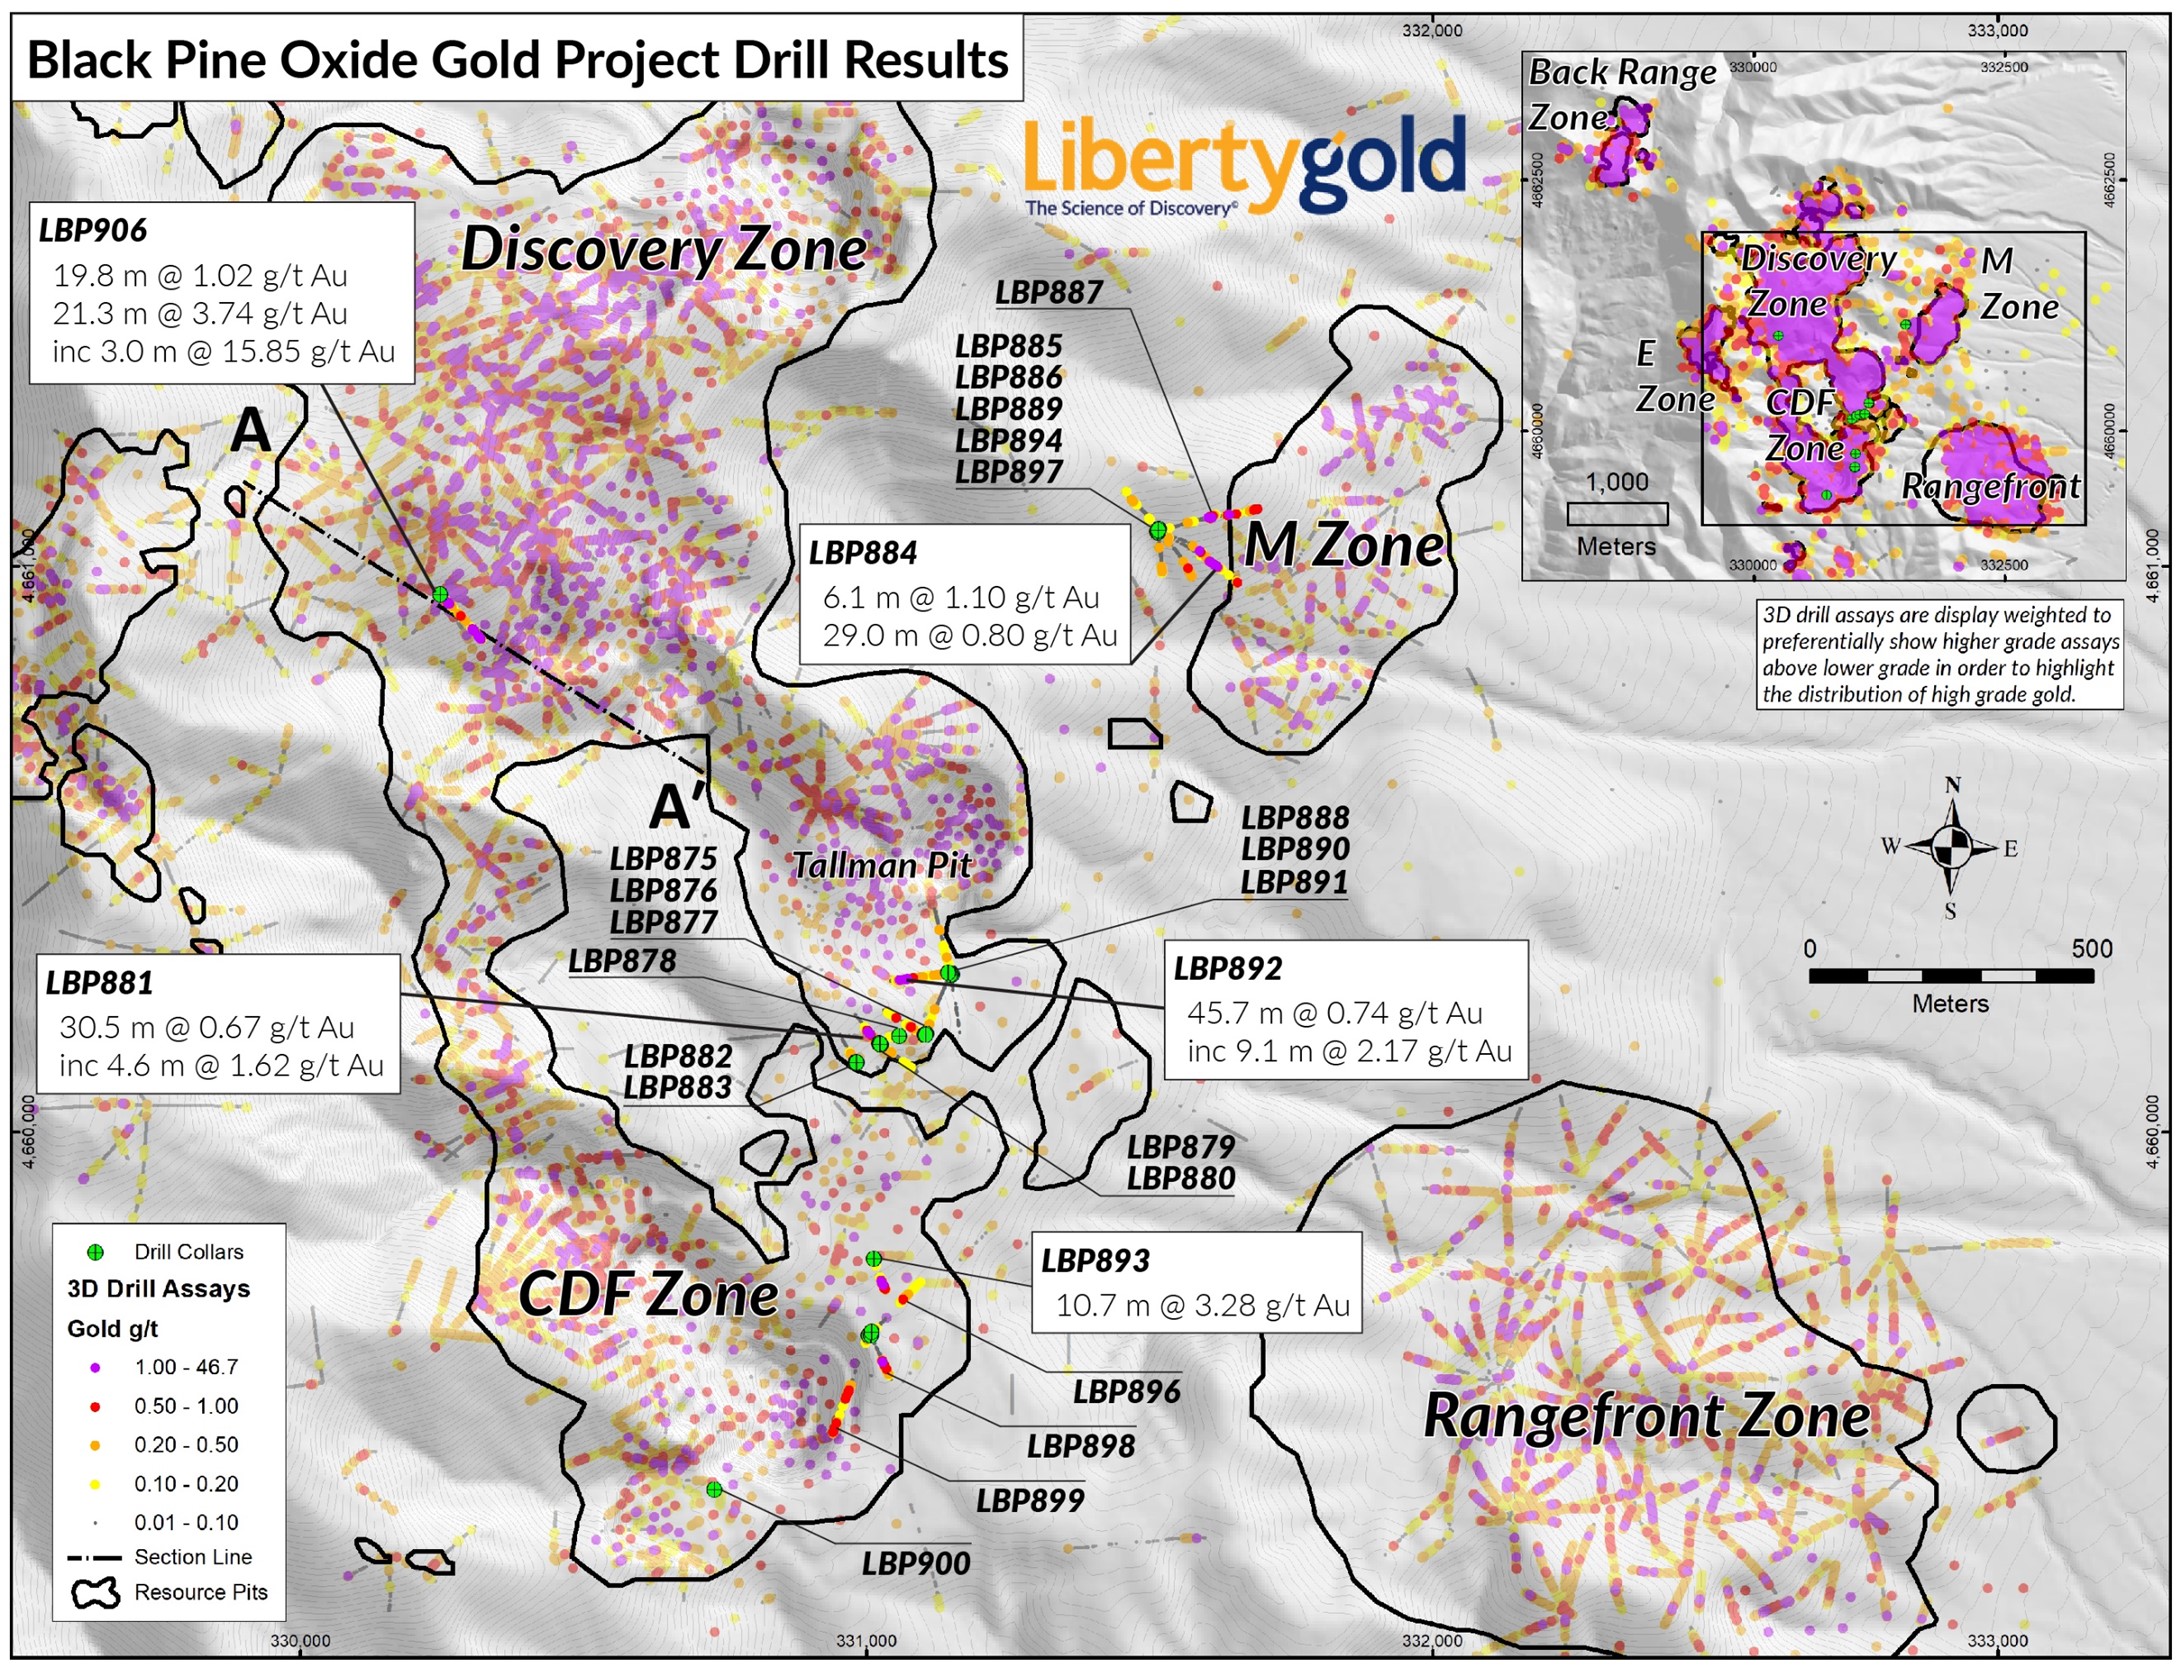 BLACK PINE OXIDE GOLD PROJECT DRILL RESULTS MAP